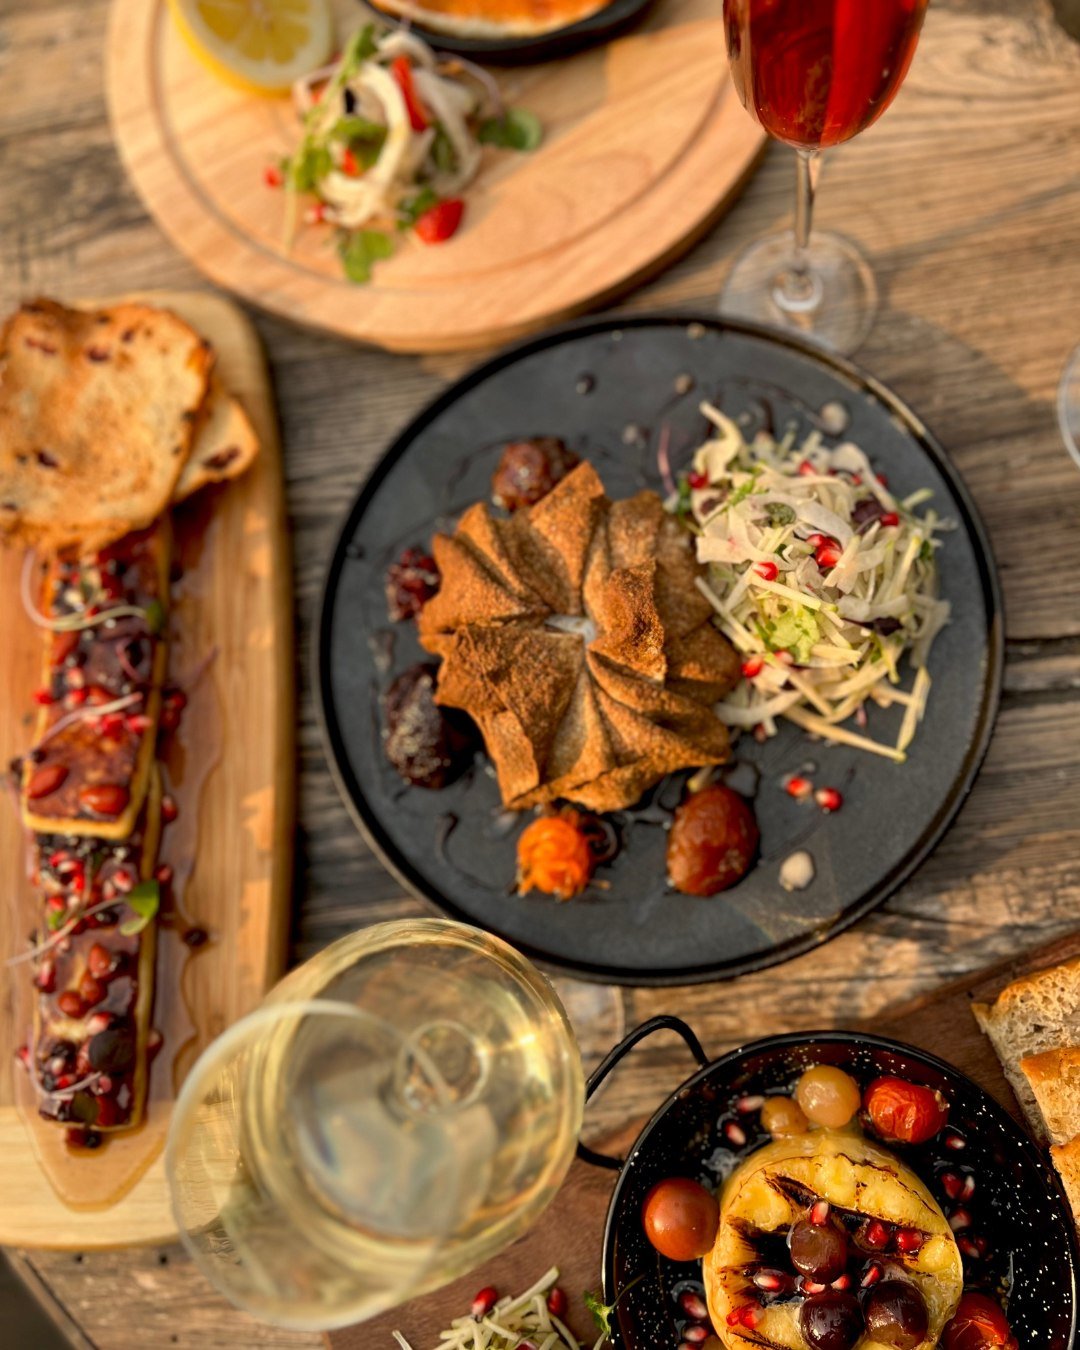 Whether you're flying solo or sharing with pals, our new day and night menus bring serious FOMO vibes &ndash; you'll be wanting to try it all. Swing by for brekkie and lunch or book for dinner via our website.